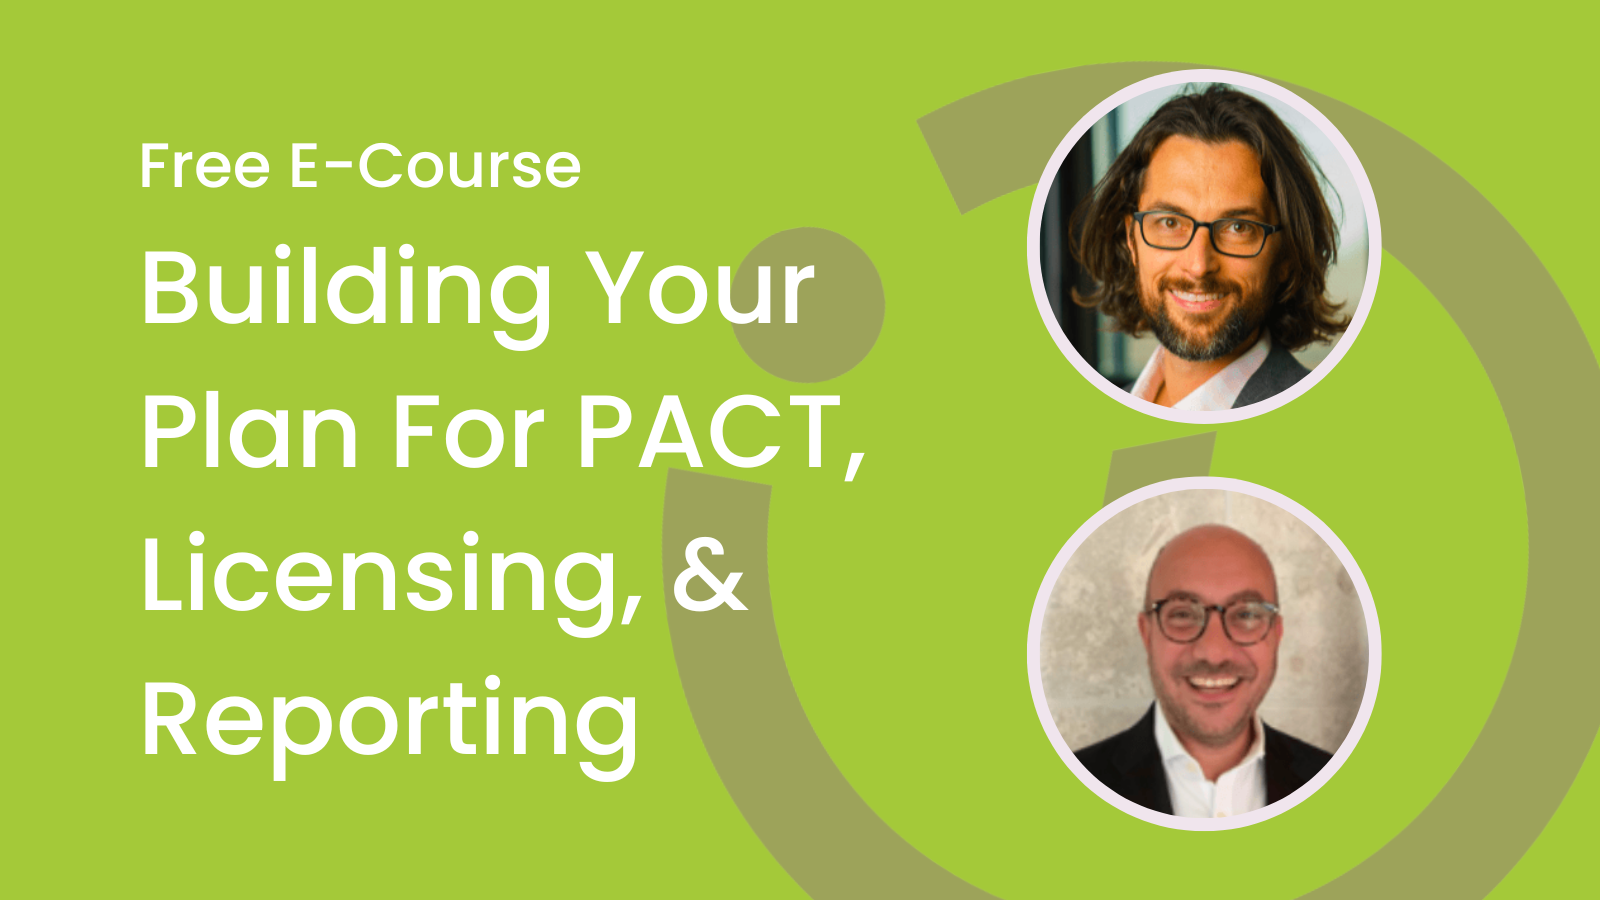 Building Your Plan for PACT Act, Licensing, Reporting